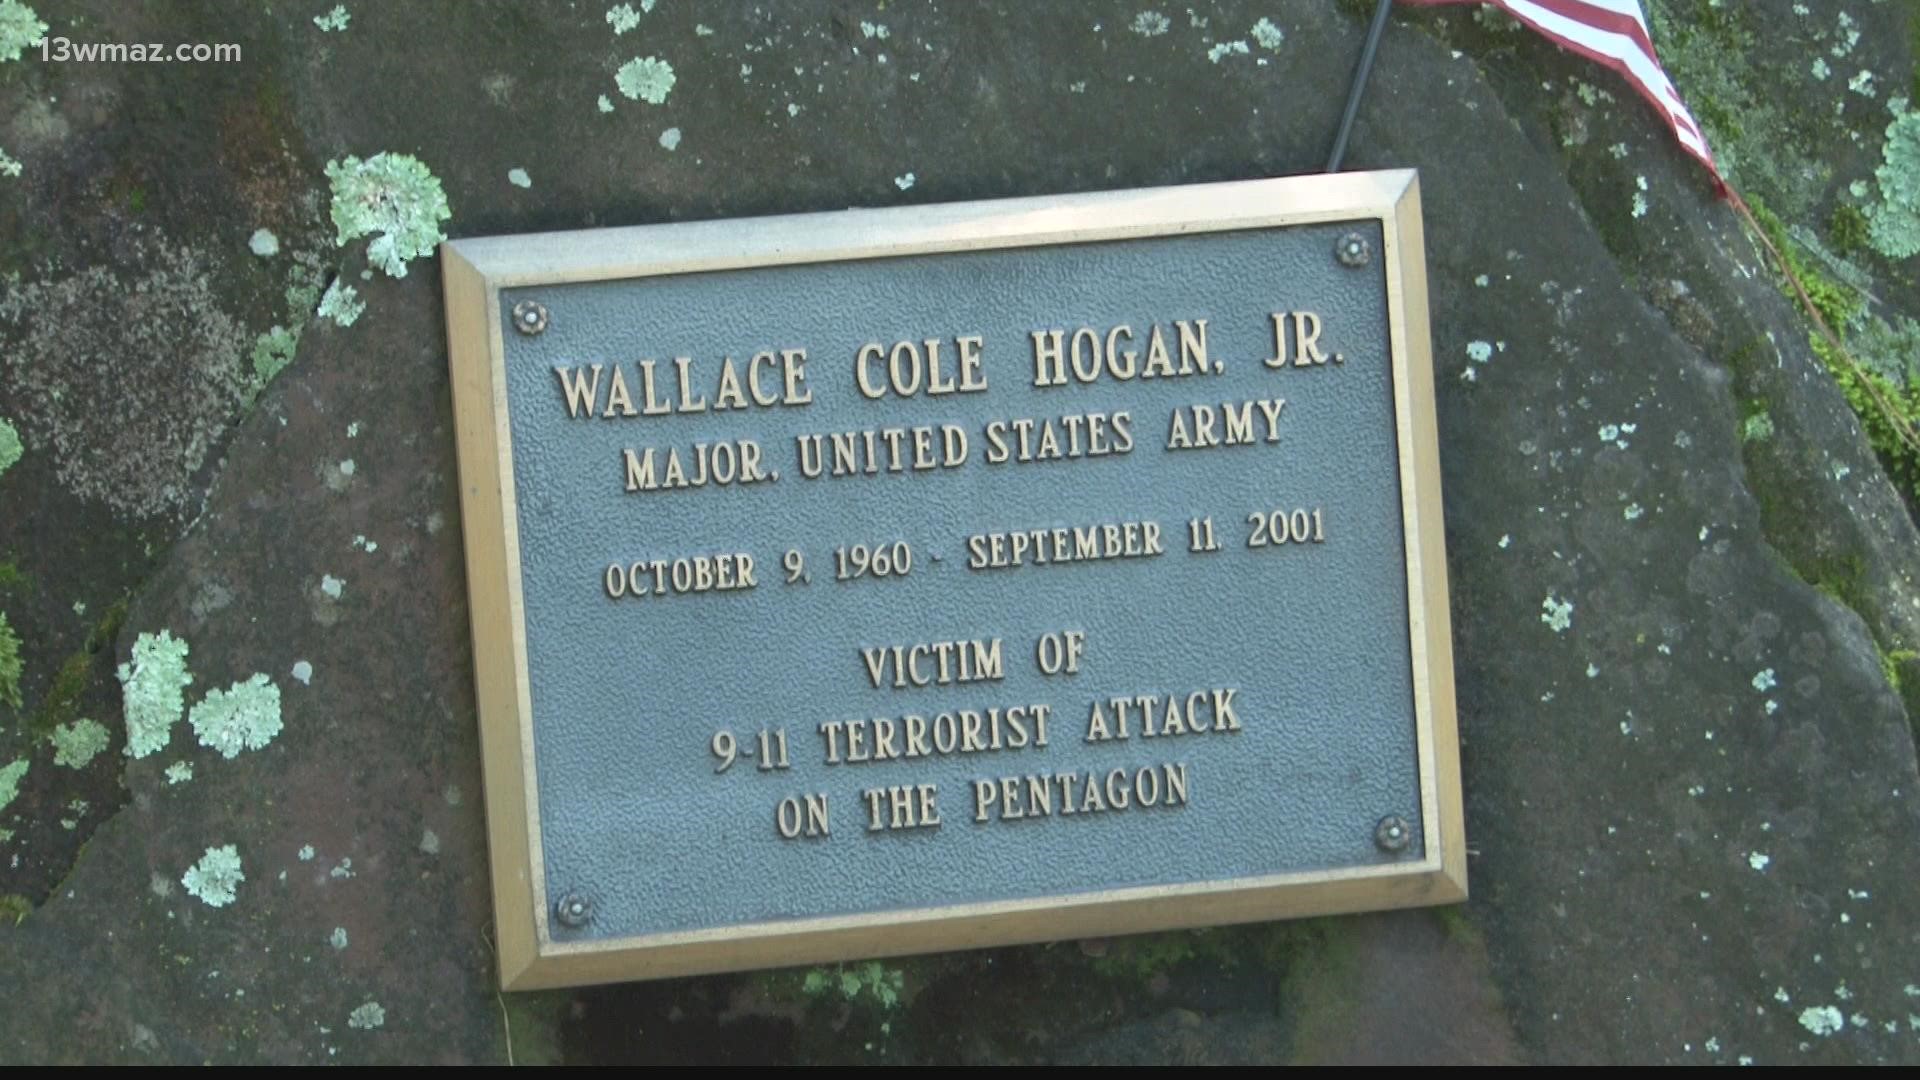 Cole Hogan lost his life working as a general's aide at the Pentagon on 9/11. Every year, people honor his memory.